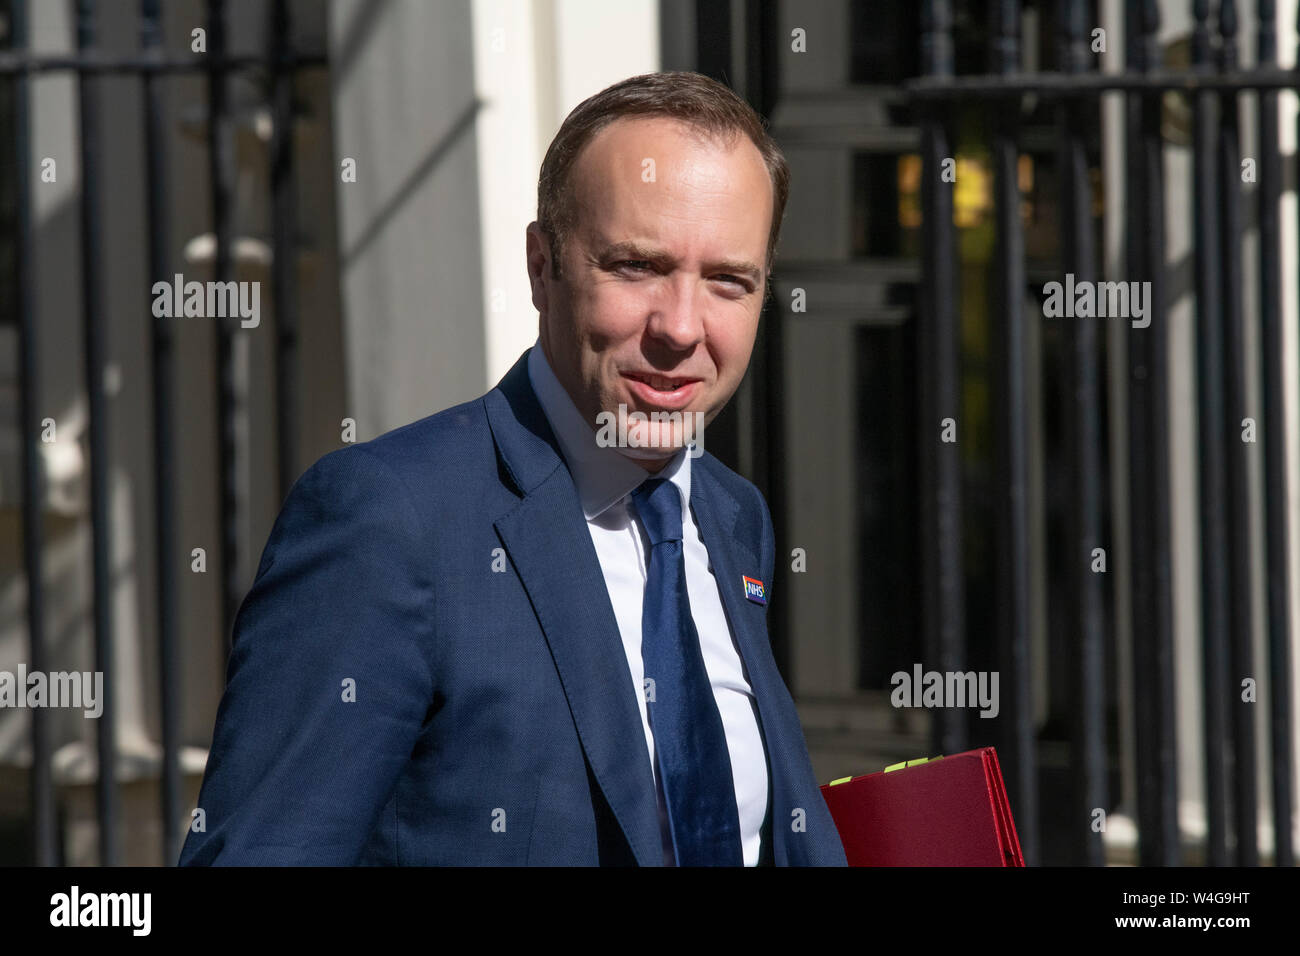 Downing Street, London, UK. 23rd July 2019. Matt Hancock, Secretary of State for Health and Social Care, arrives in Downing Street for final cabinet meeting before Boris Johnson is announced as new PM. Credit: Malcolm Park/Alamy Live News. Stock Photo